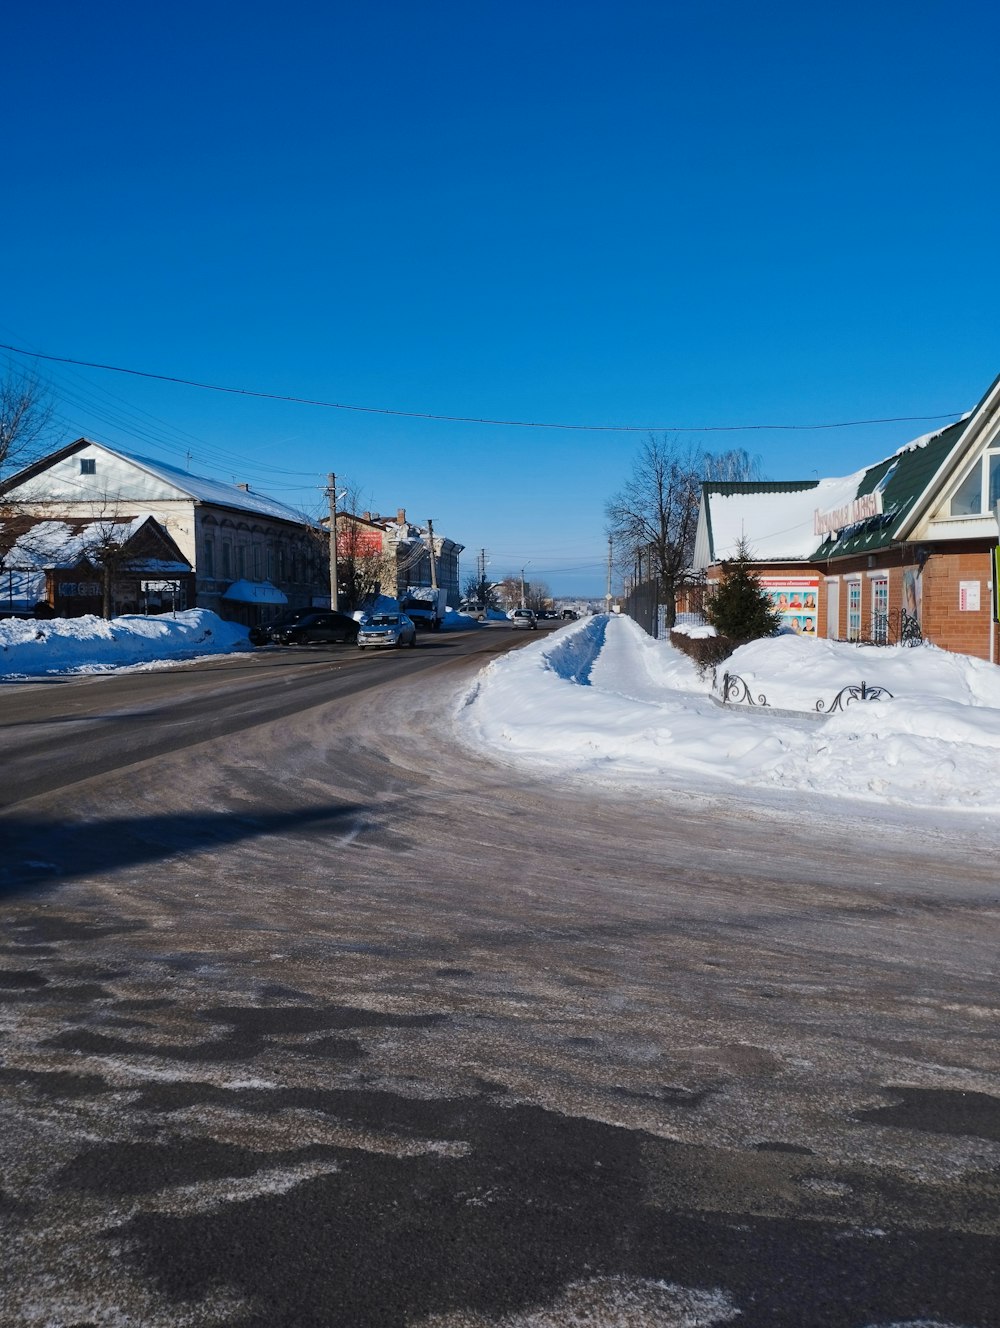 a street with snow on the ground and houses in the background